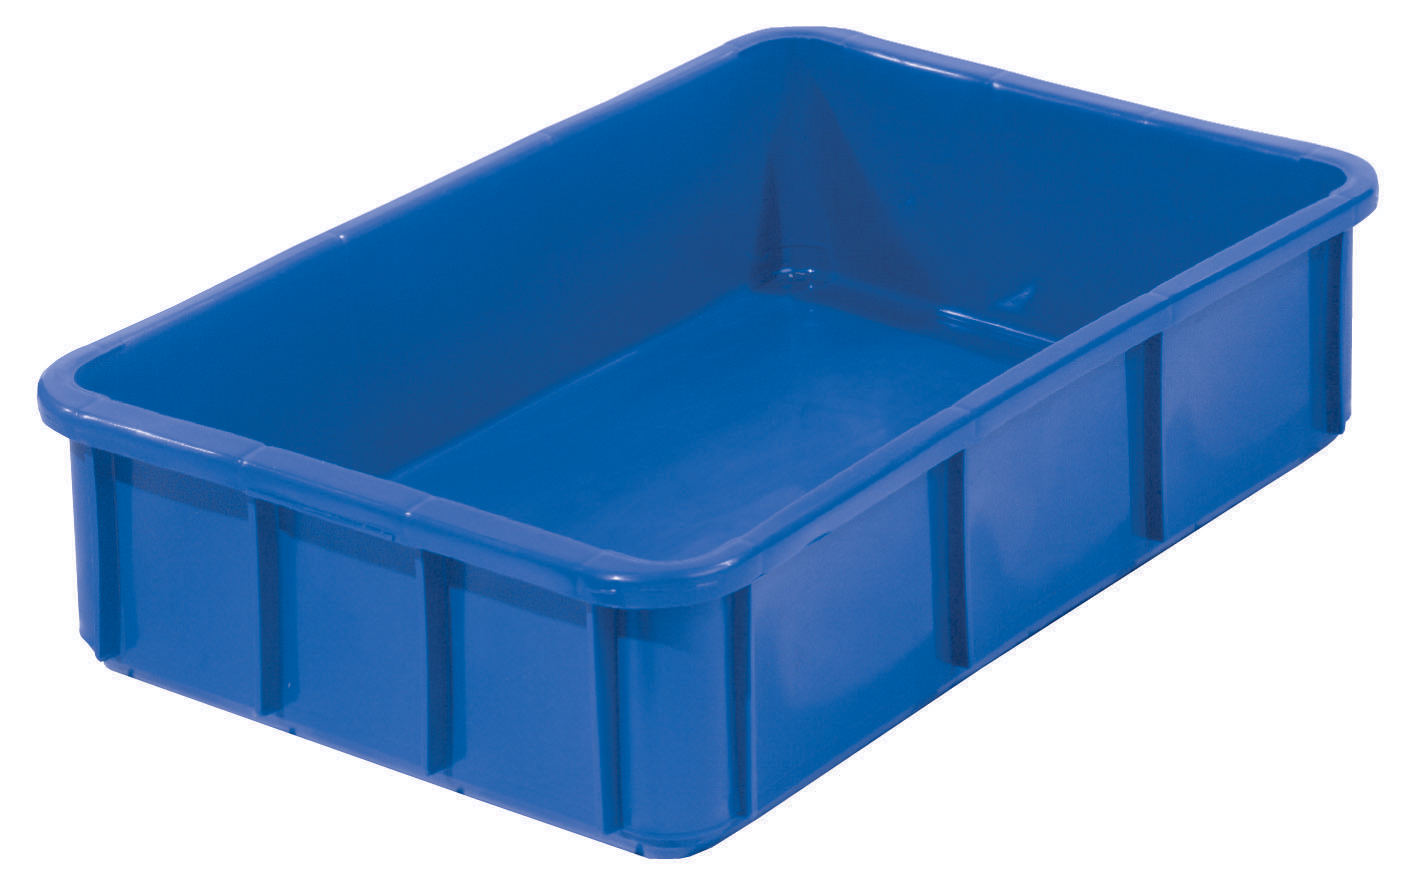 25 x 17 x 06 – Straight Wall Handheld Container